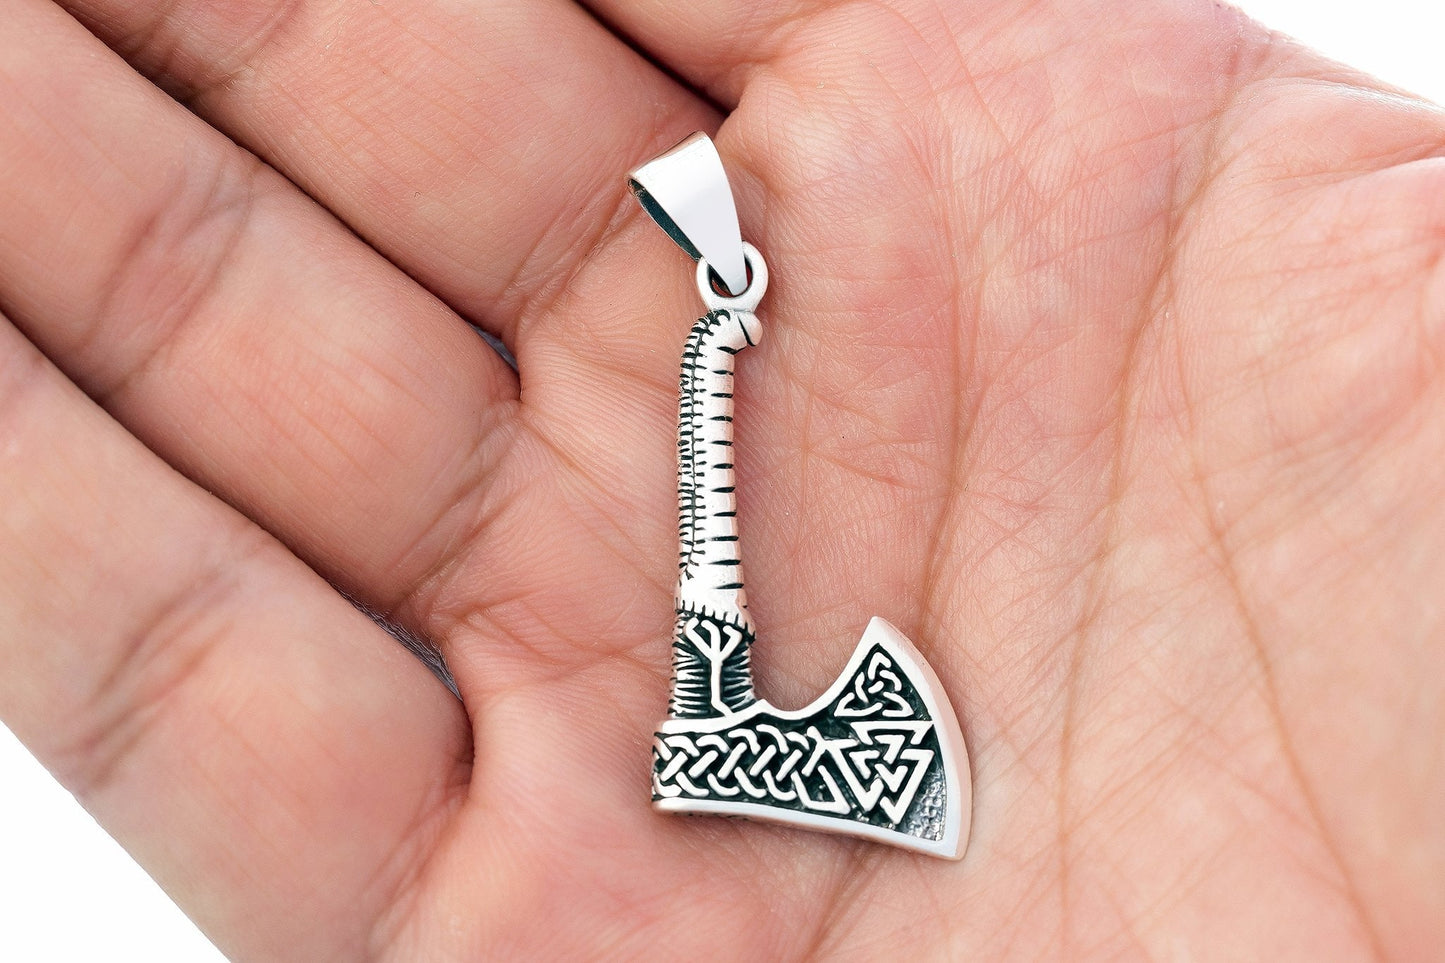 925 Sterling Silver Viking Axe with Valknut Double Sided Pendant - SilverMania925